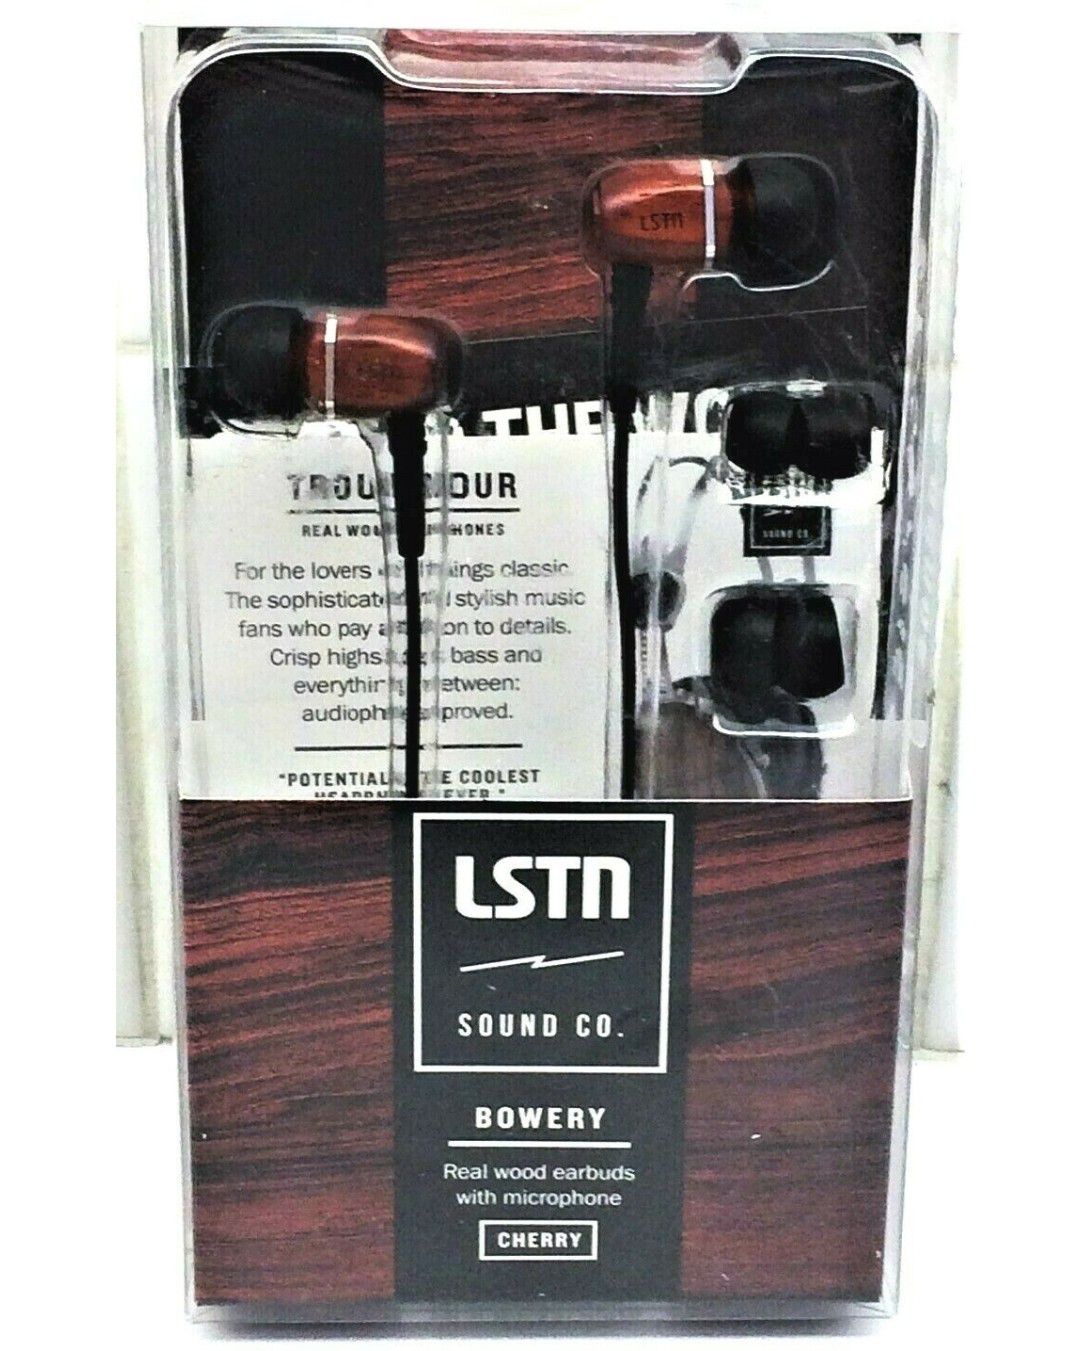 LSTN BOWERY EARBUDS CHERRY BRAND NEW